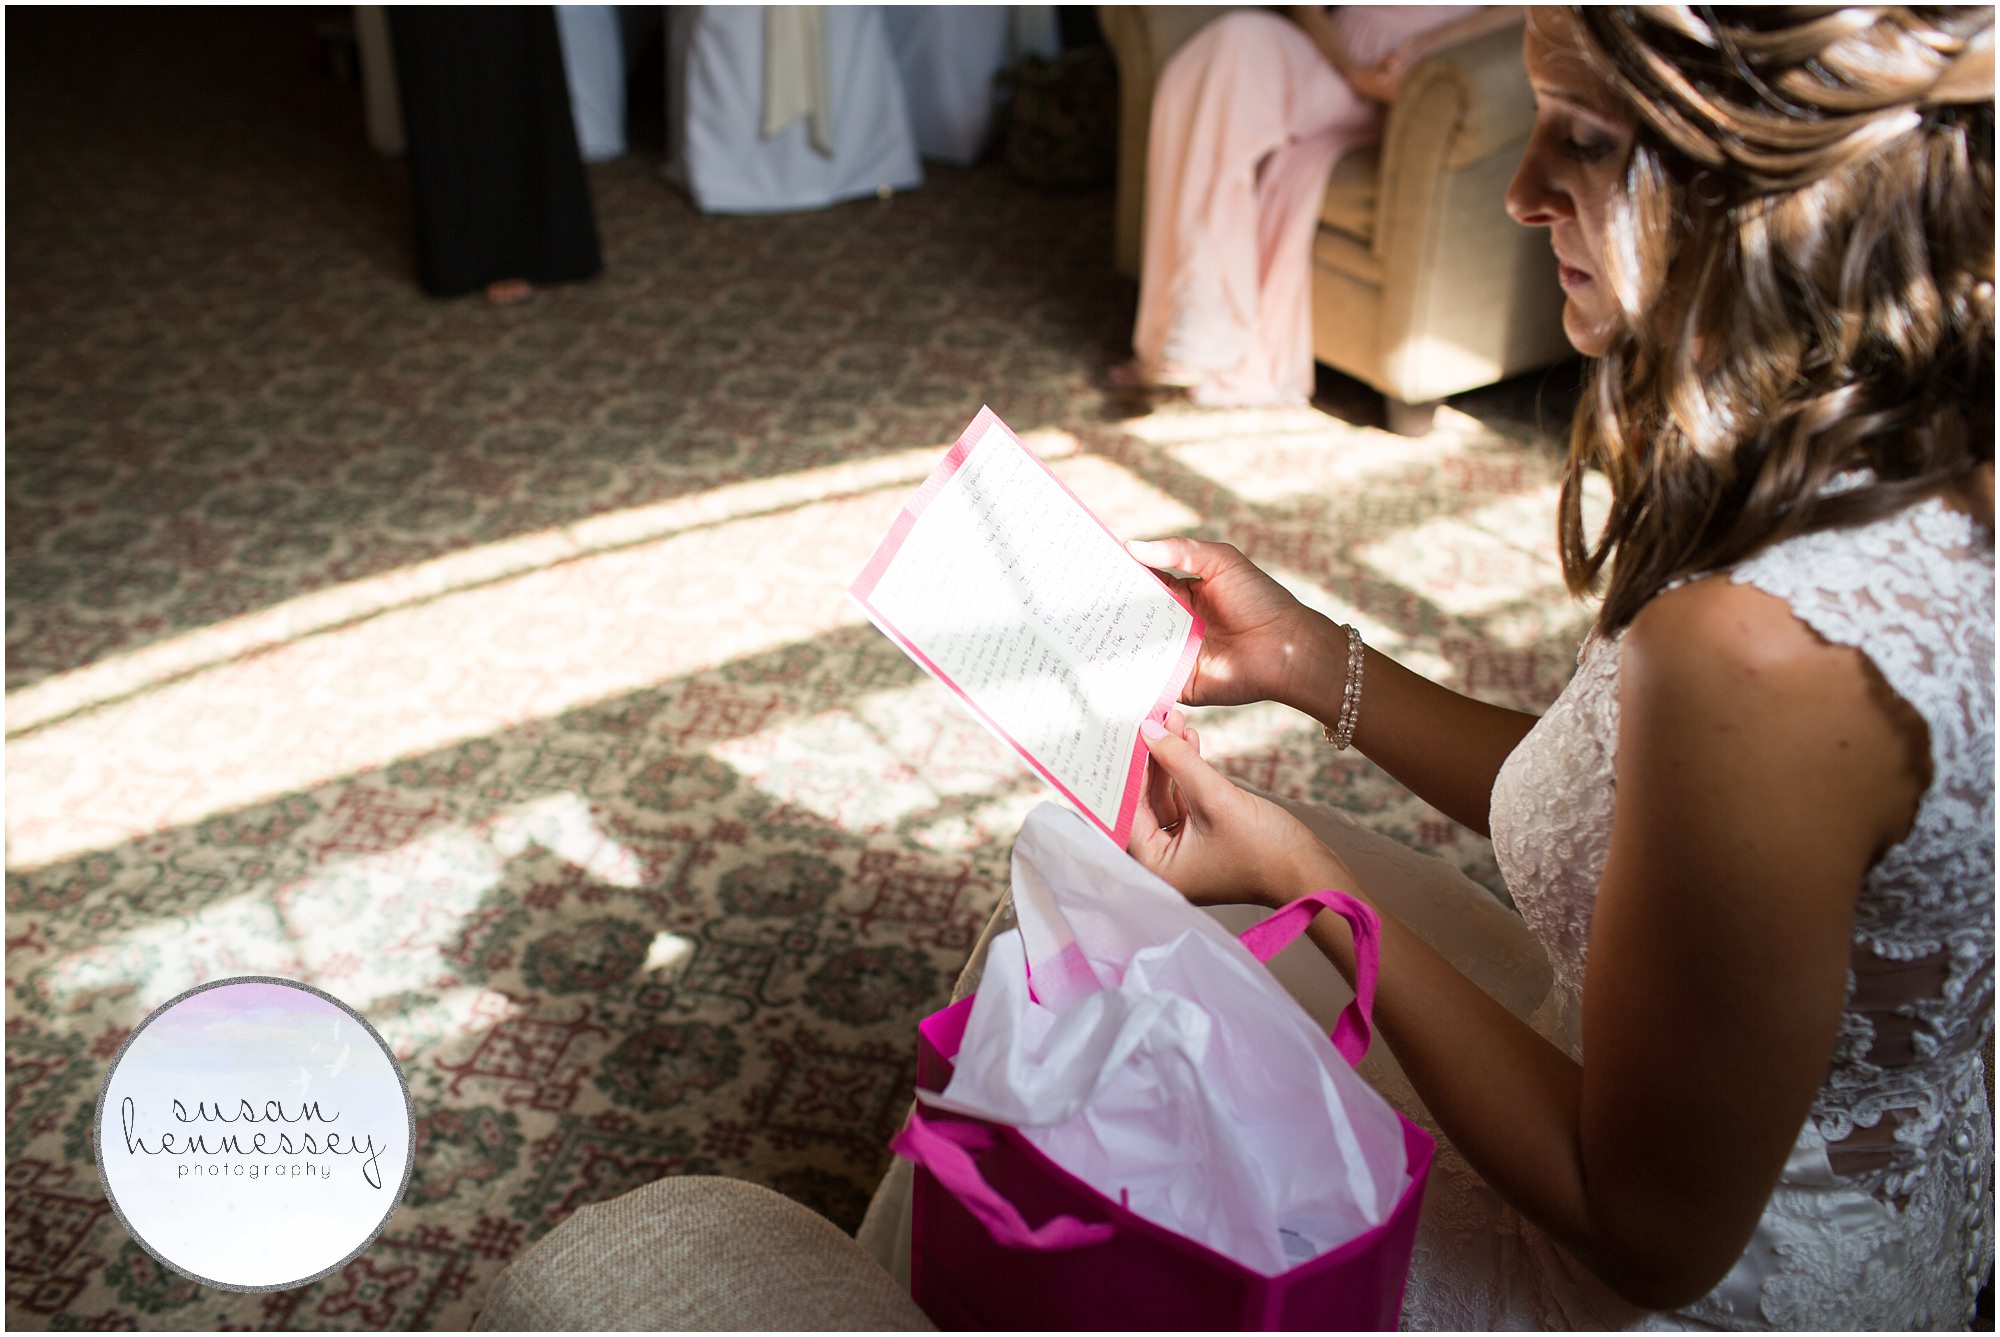 Bride reads card from groom before their first look.